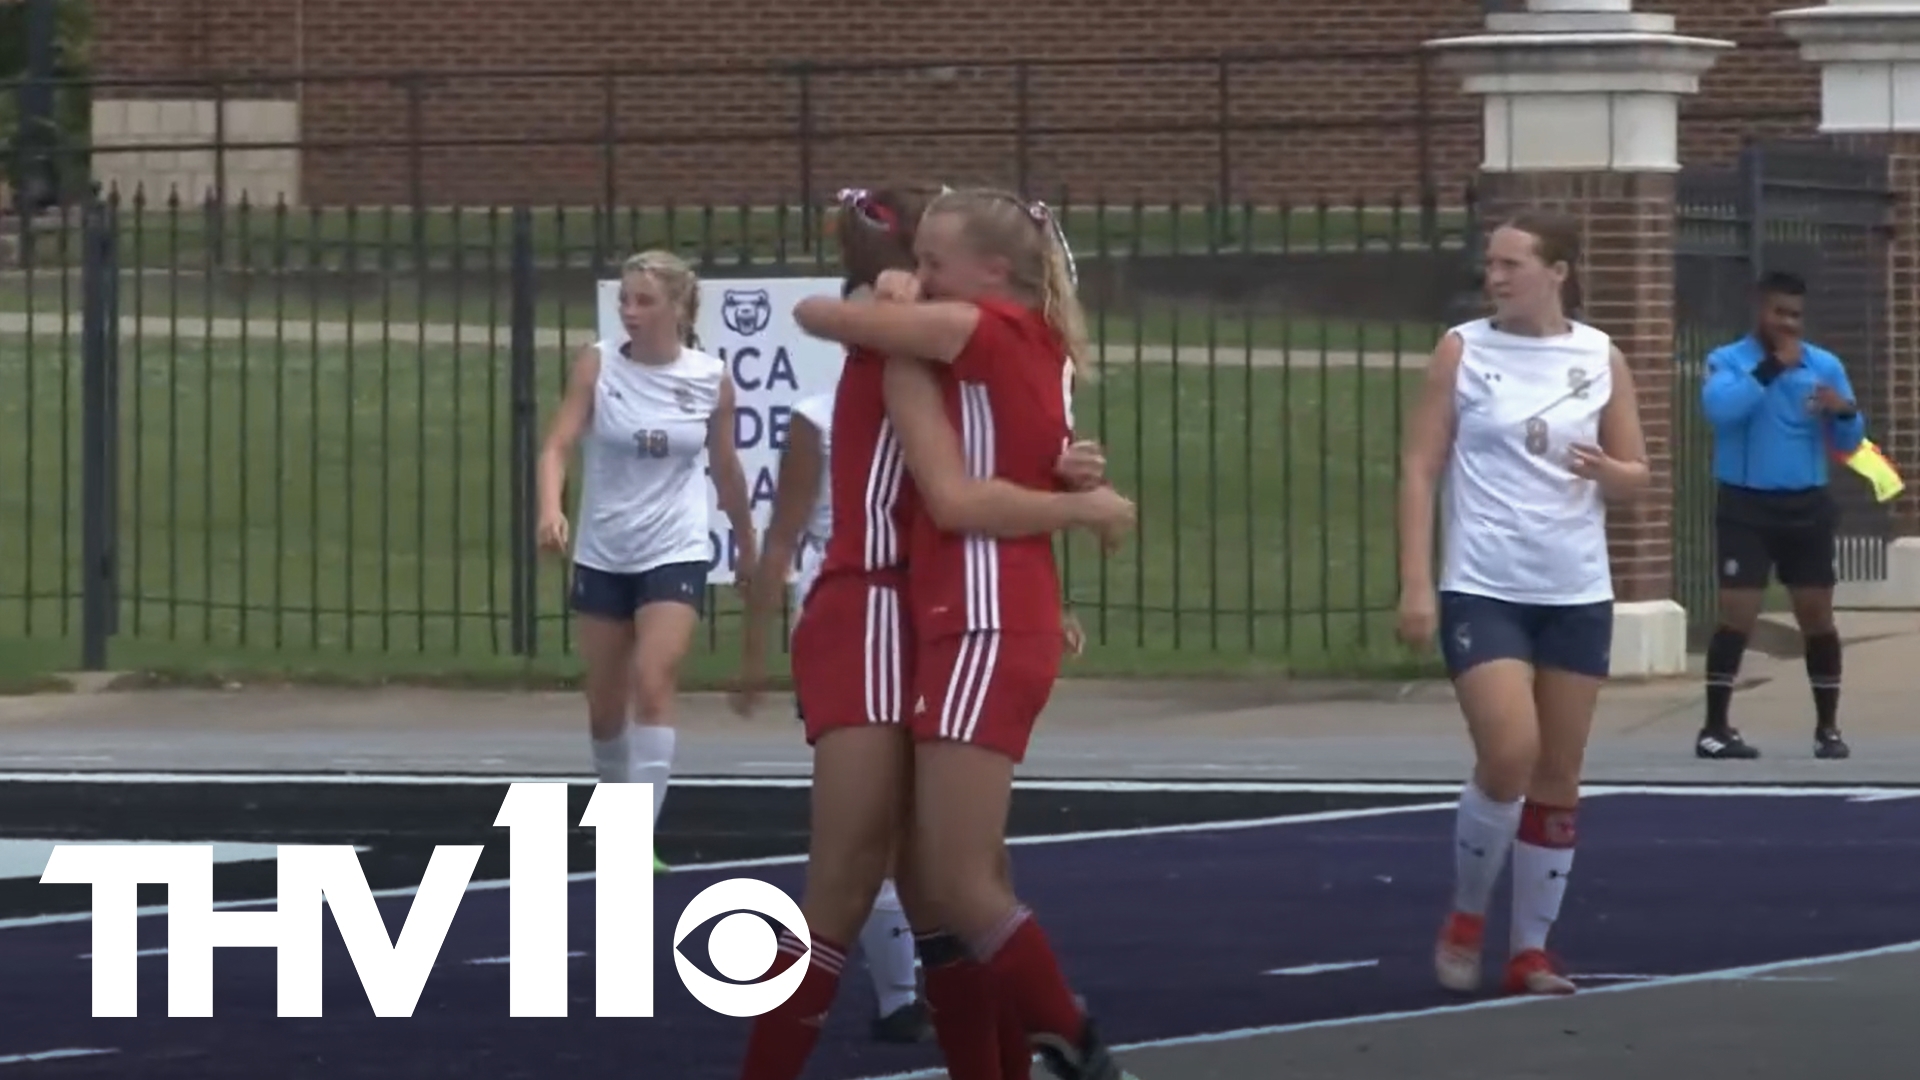 Harding Academy blew past Shiloh Christian 5-2 to claim its fourth consecutive Class 4A girls soccer state crown.